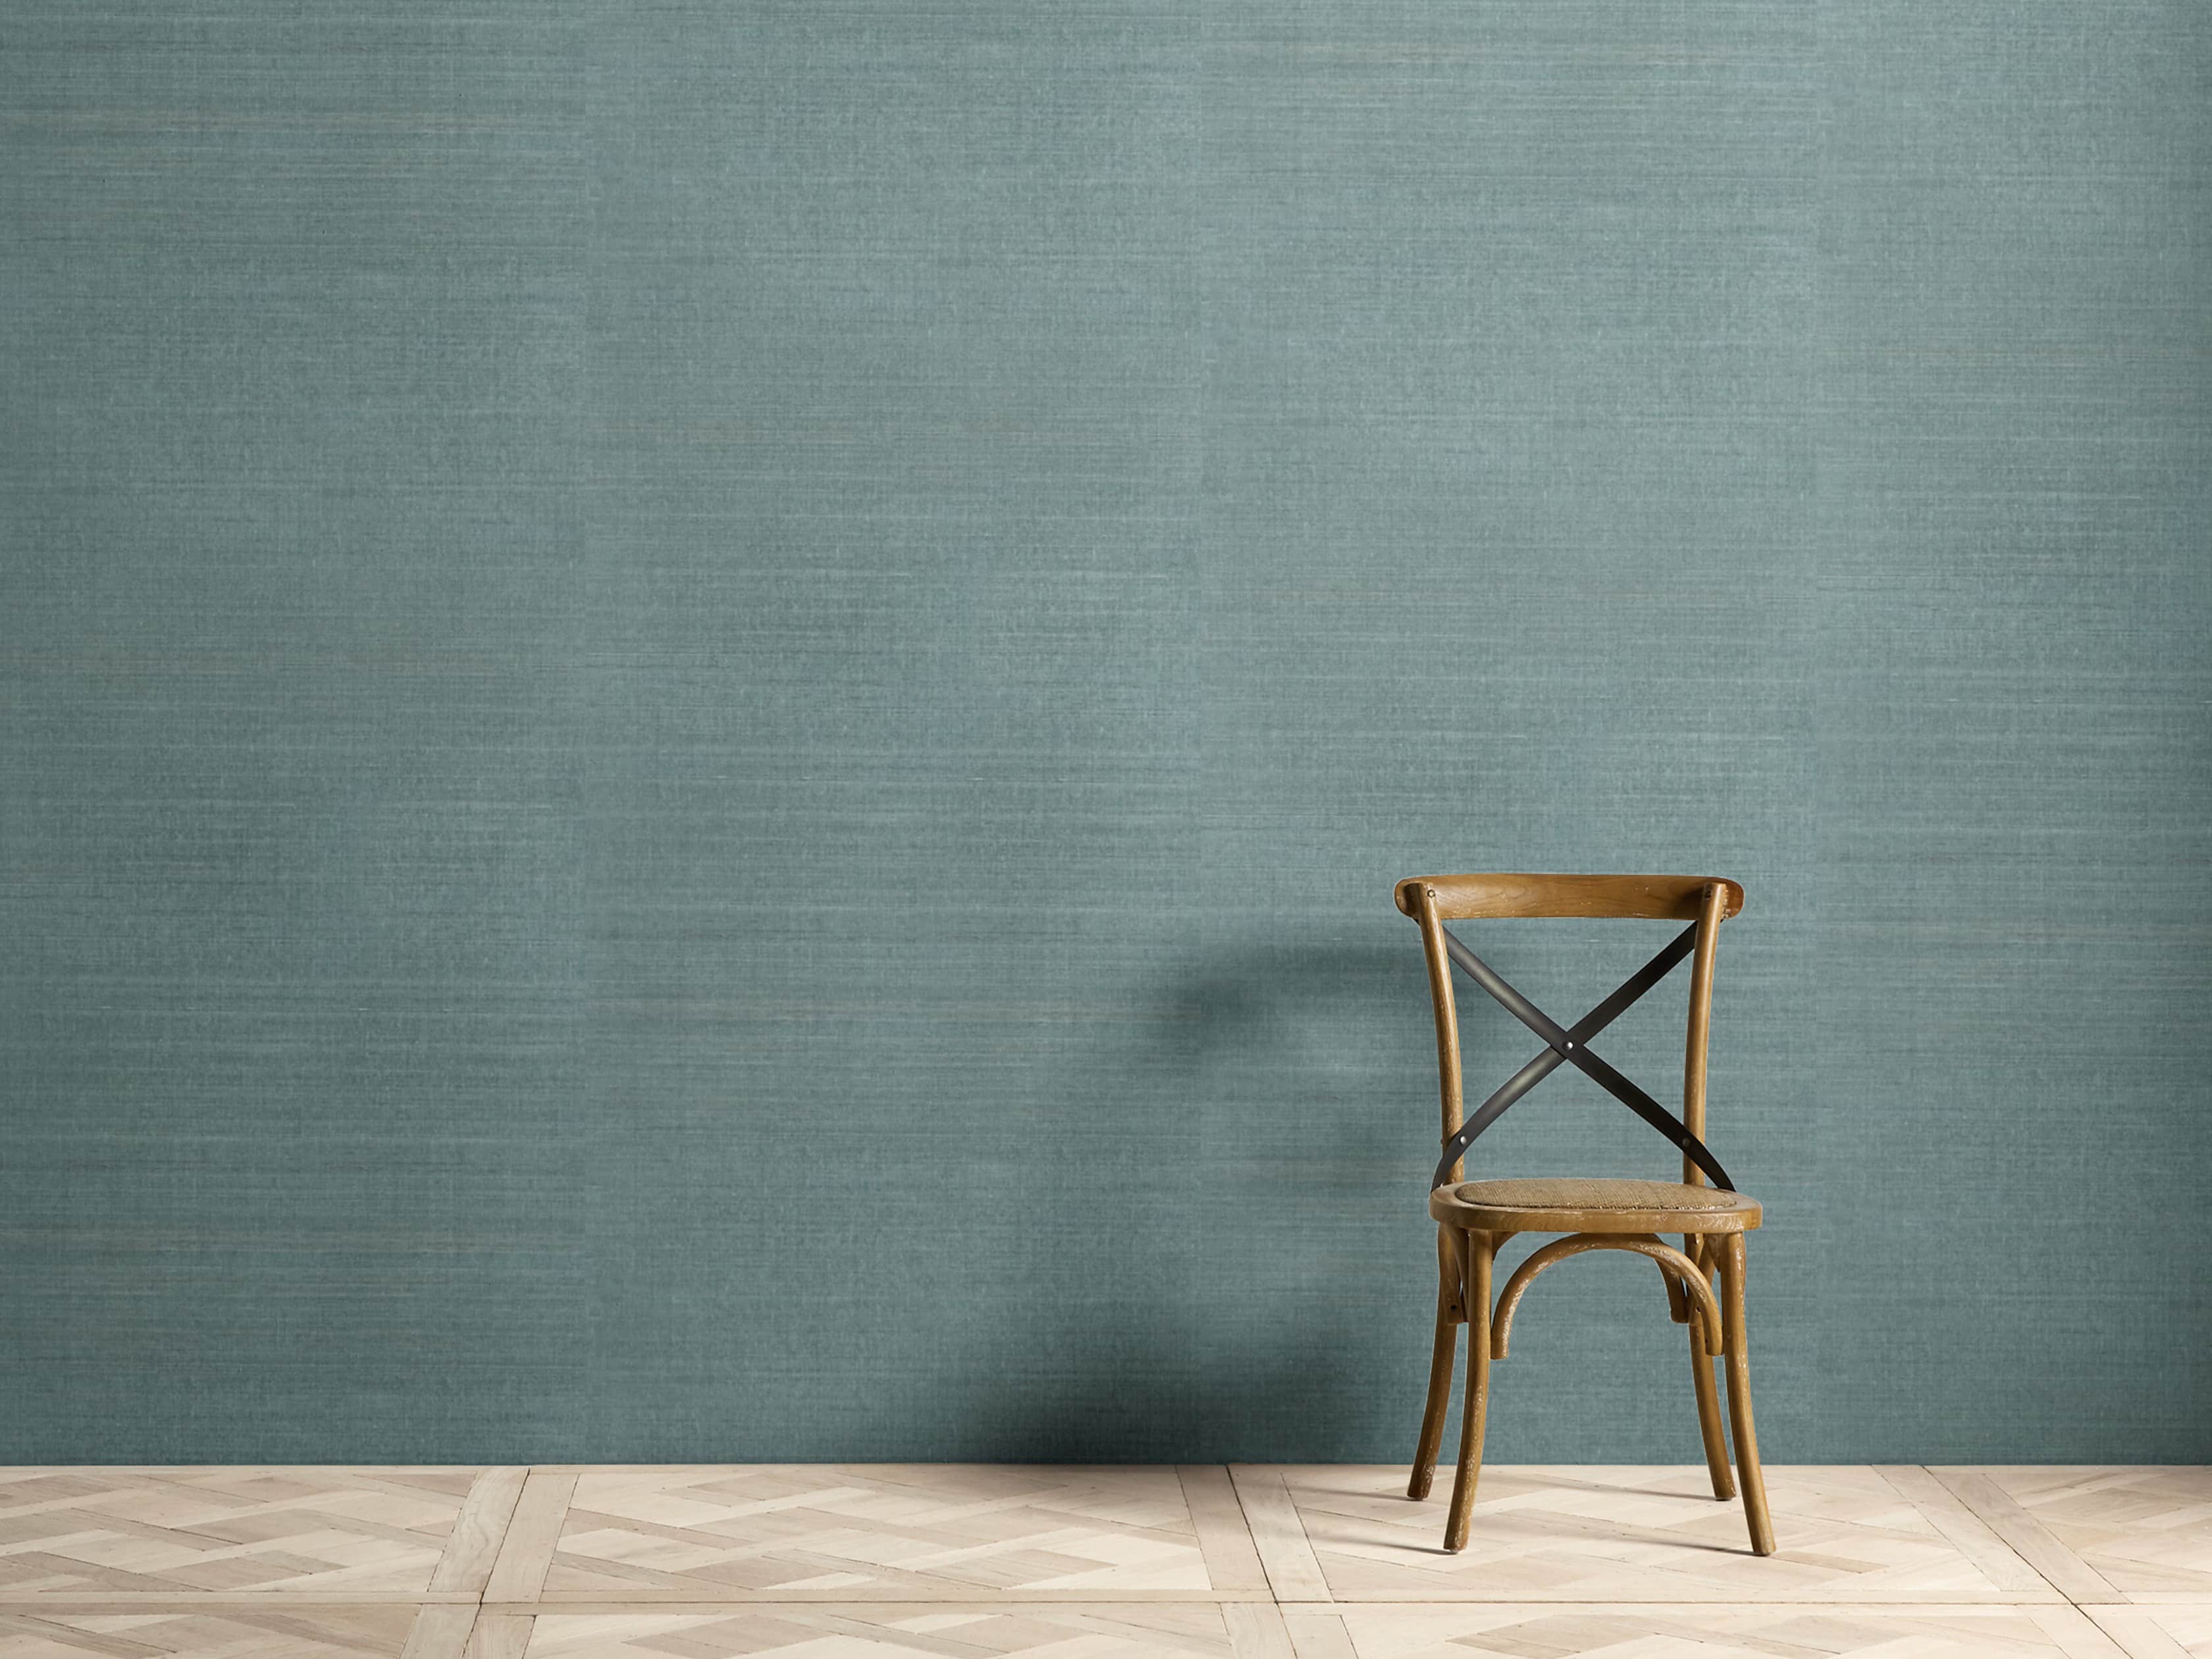 York Wallcoverings Ashford Tropics 72sq ft Blue Grasscloth Textured  Grasscloth Unpasted Wallpaper in the Wallpaper department at Lowescom